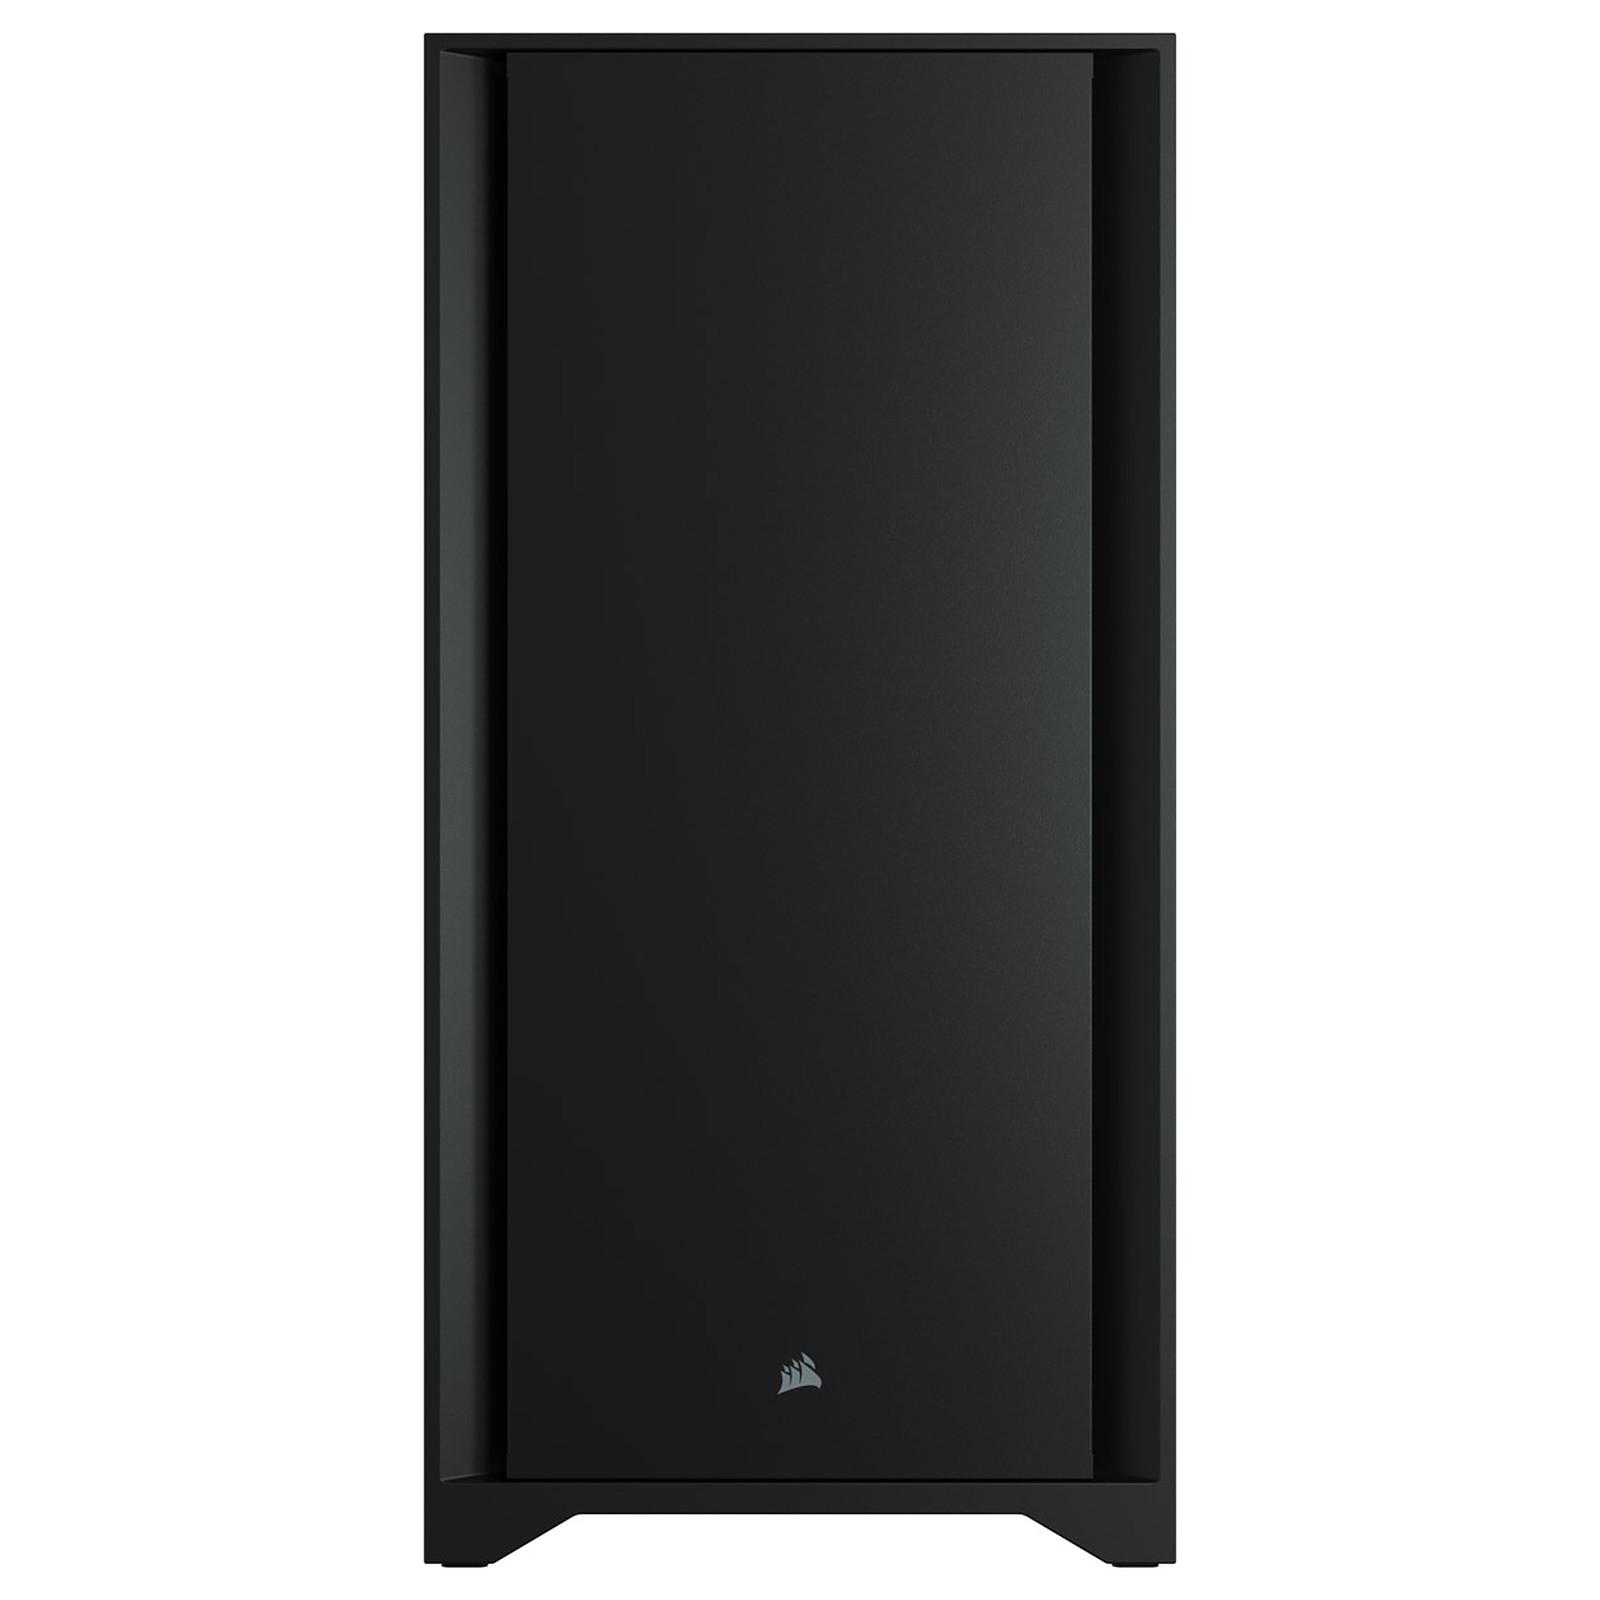 CORSAIR 4000D TEMPERED GLASS MID-TOWER BLACK